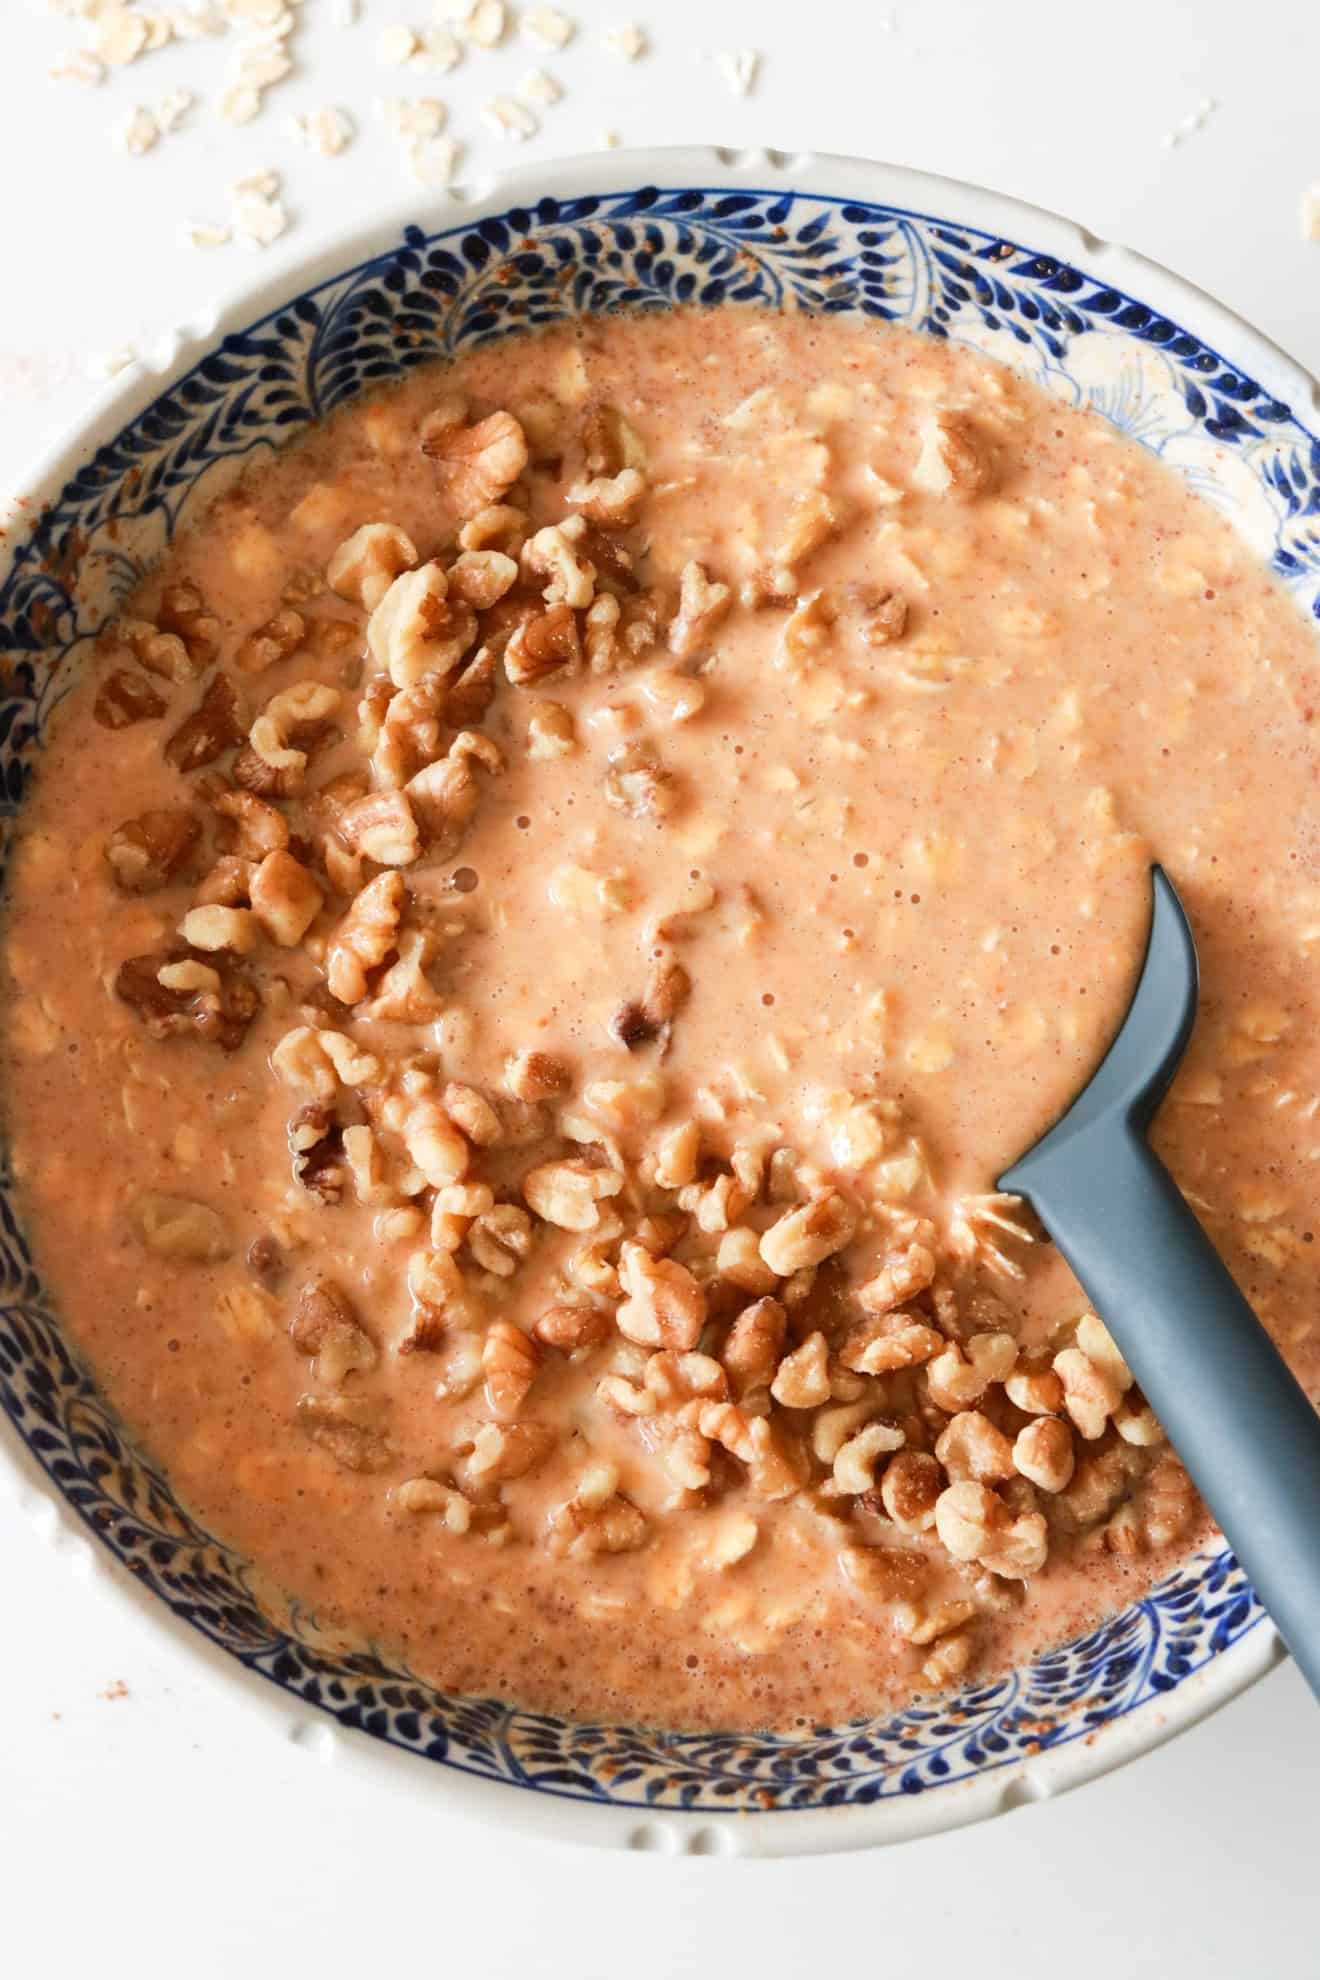 Easy Baked Pumpkin Oatmeal - The Toasted Pine Nut